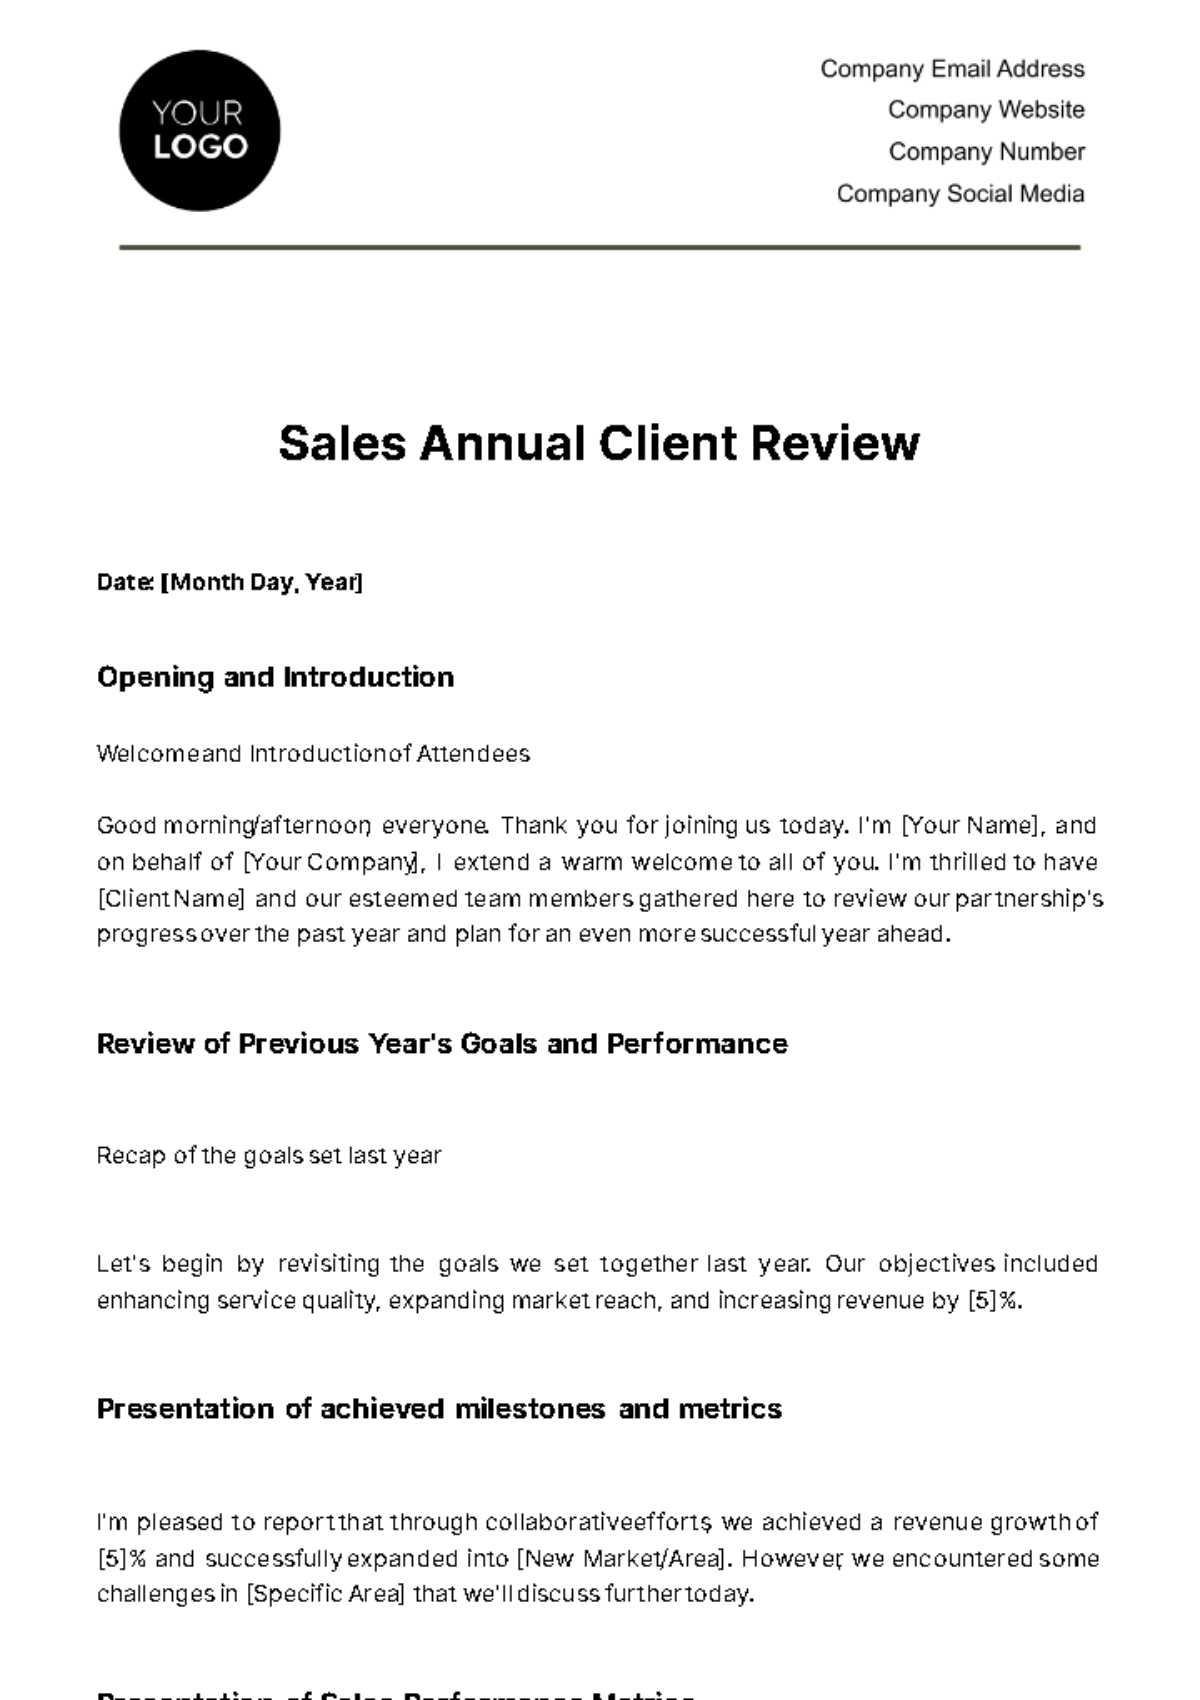 Sales Annual Client Review Template